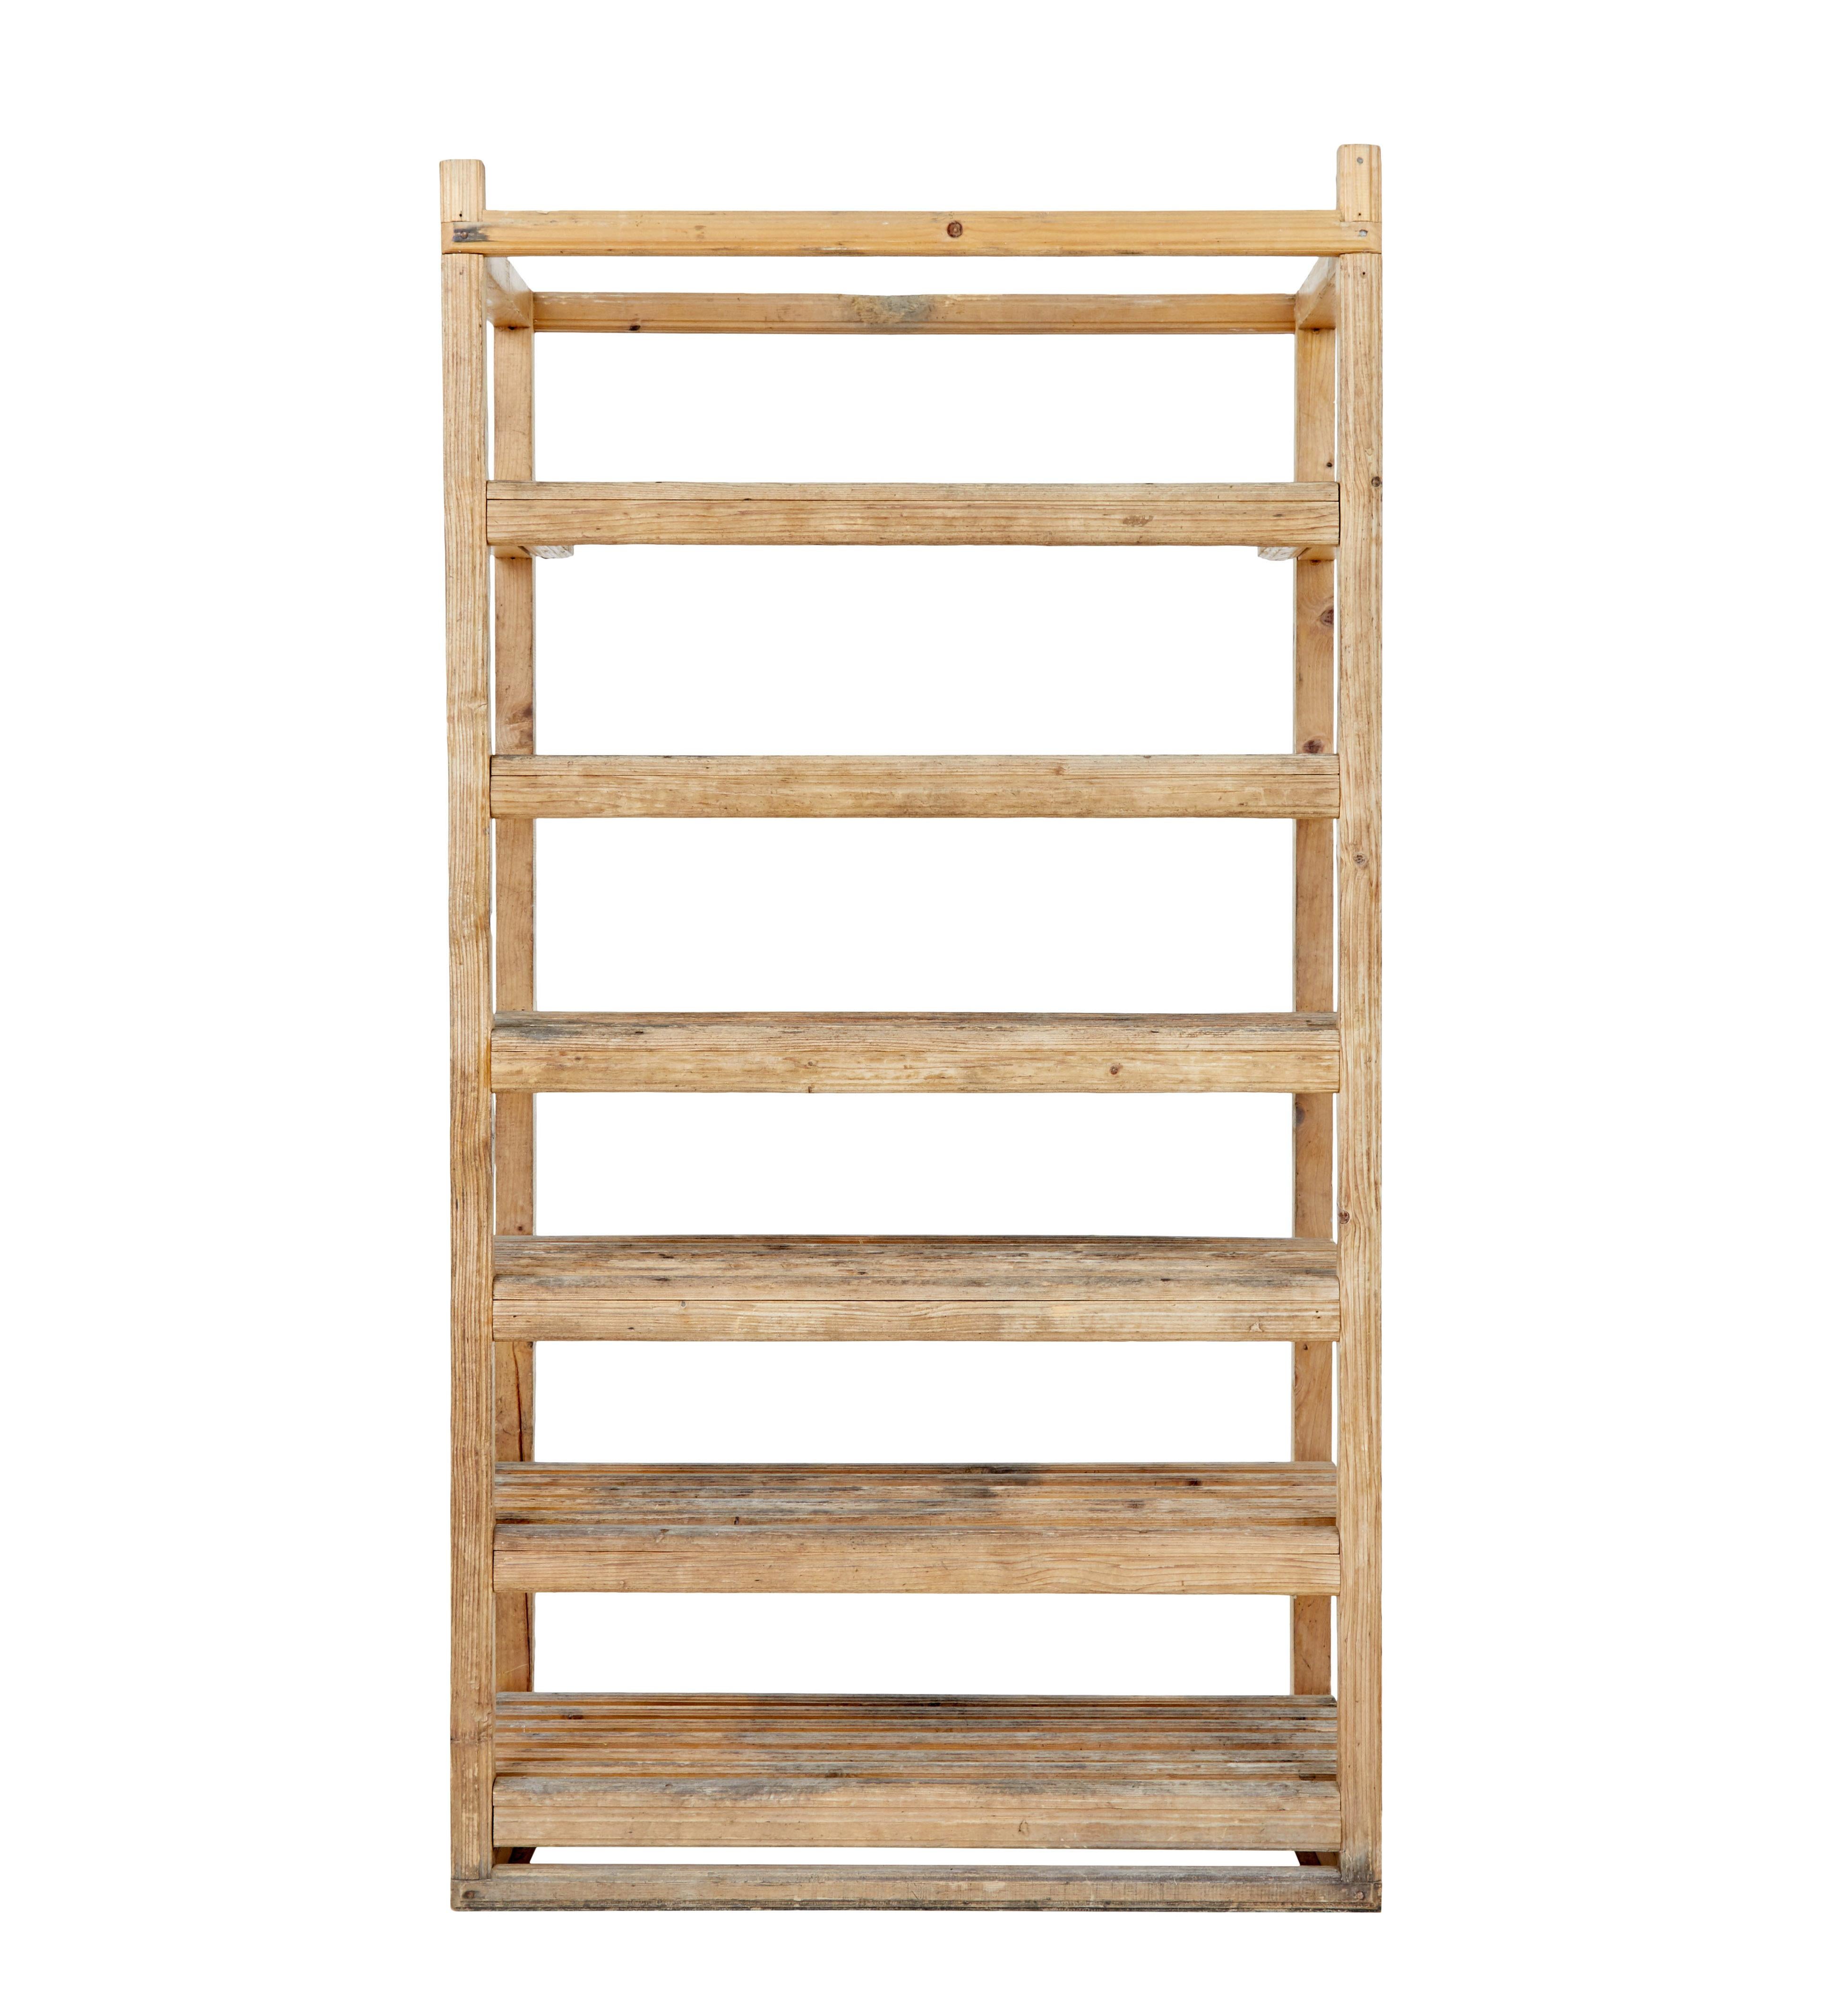 Early 20th century rustic pine storage rack circa 1920.

Rustic made Swedish pine rack, which was likely to have been made for use in a garden room, for cultivation and storage.

Basic joinery used with a hand nailed frame, this could be made